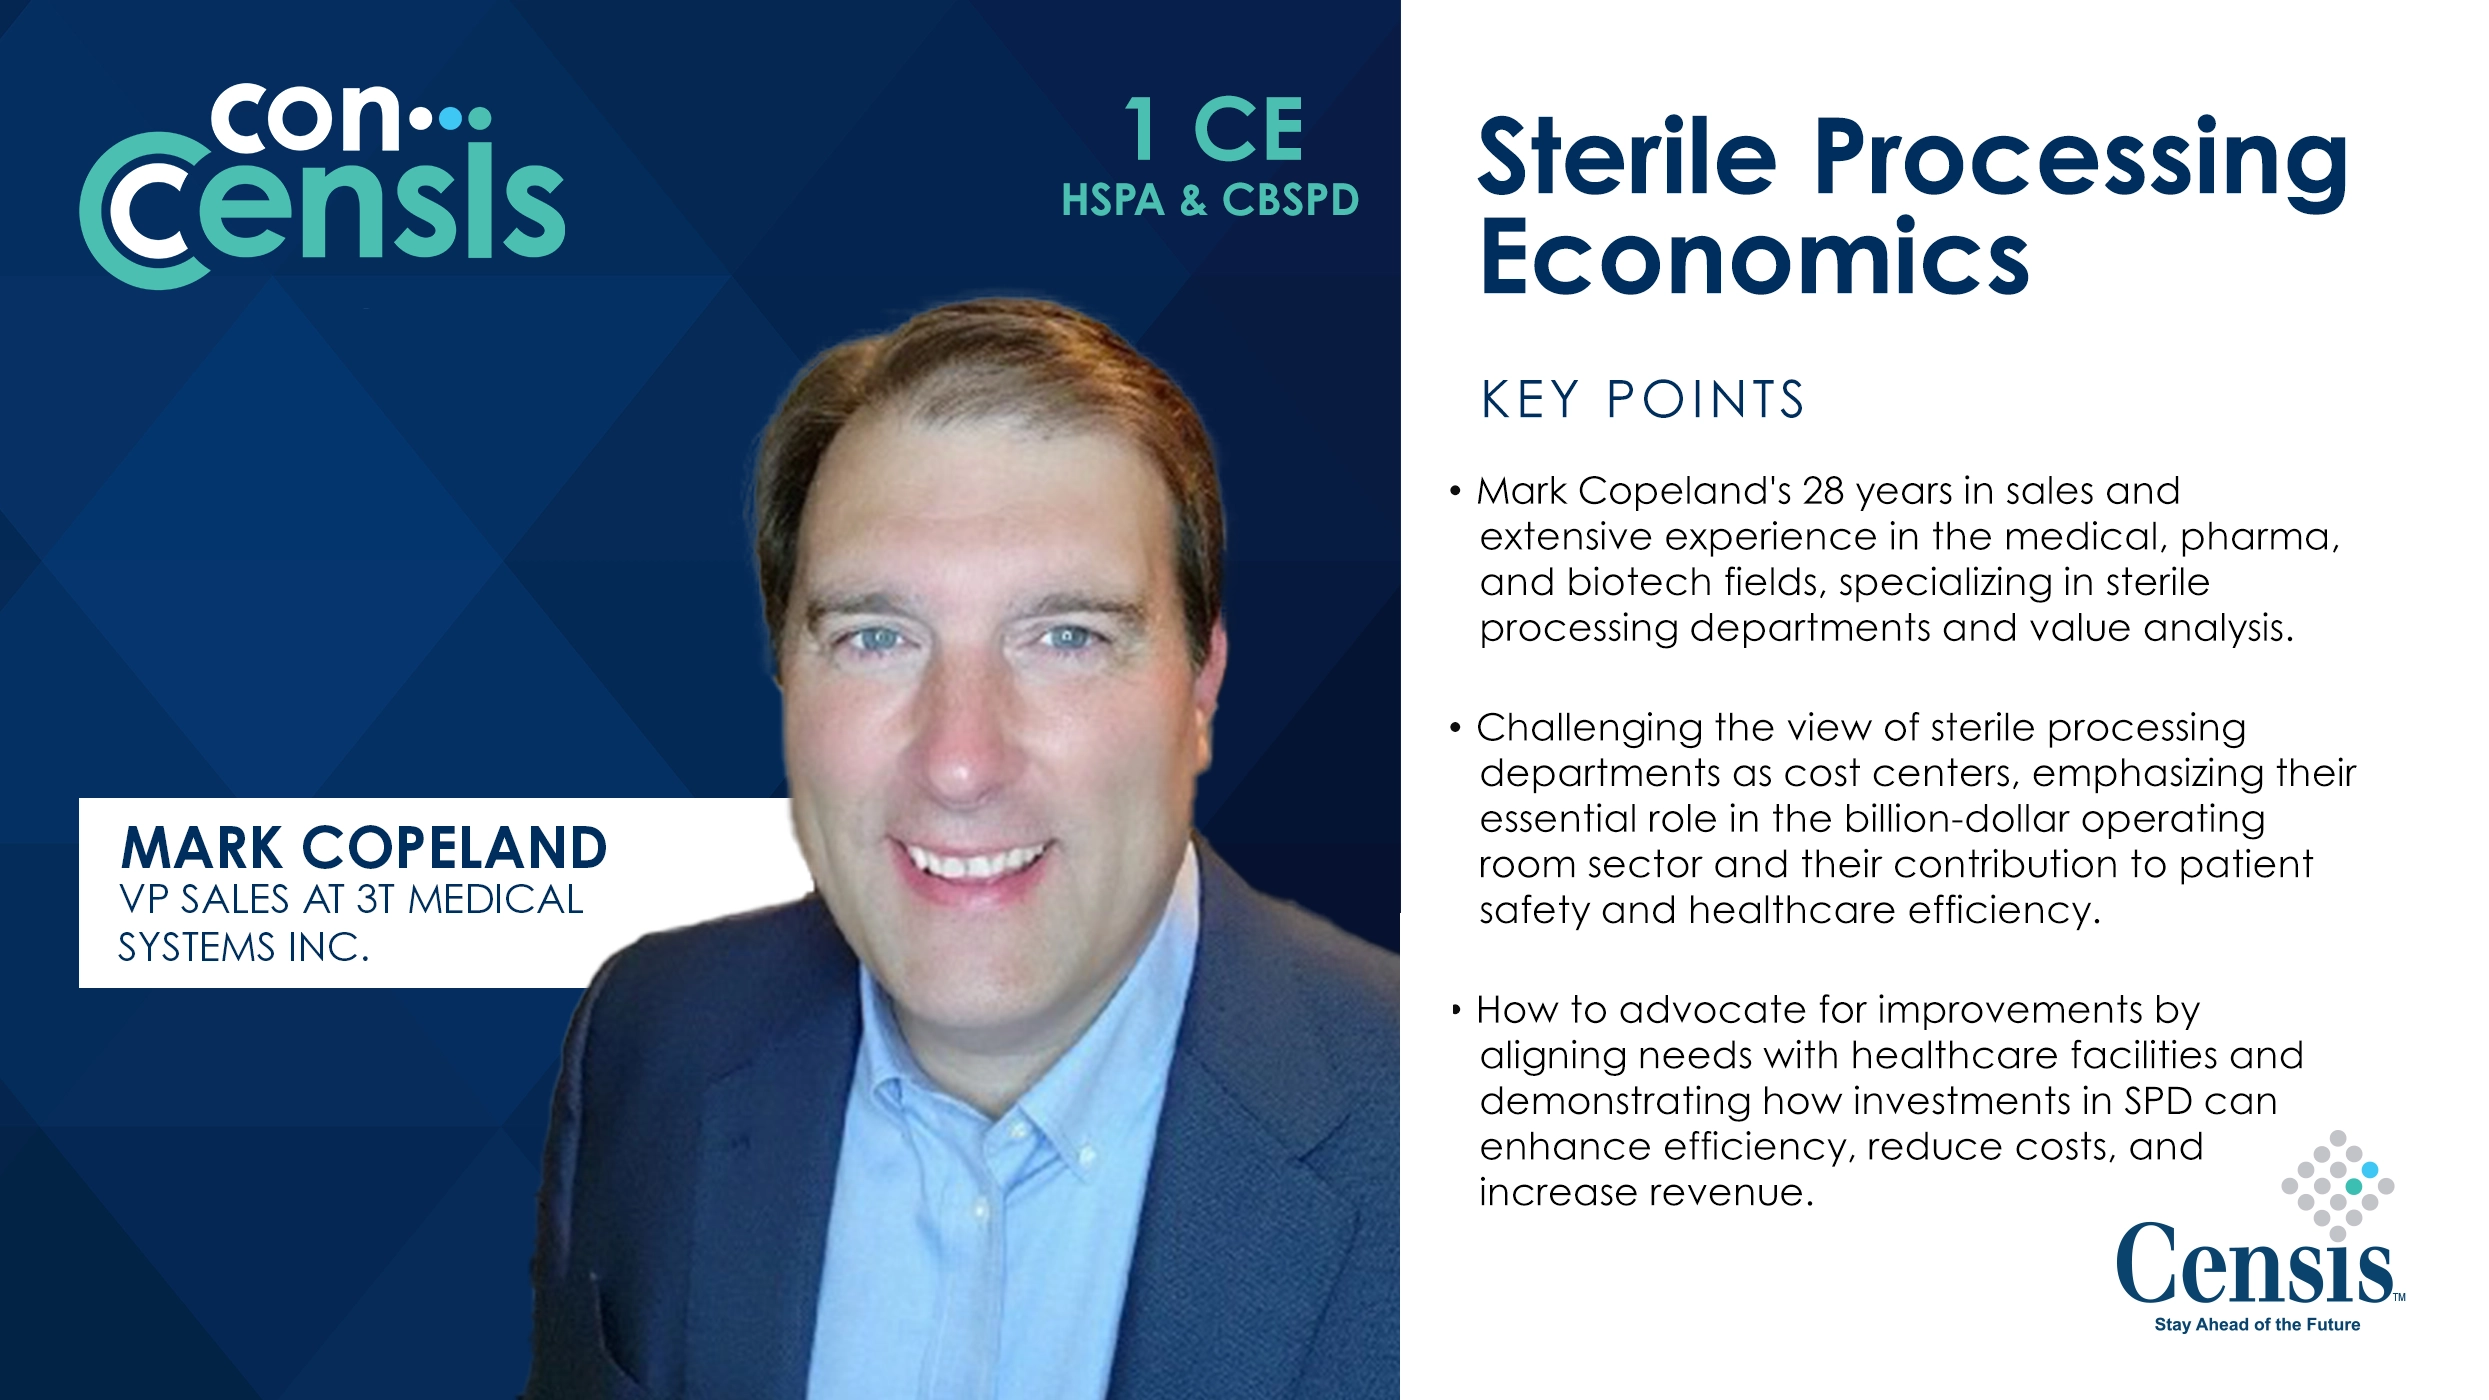 Sterile Processing Economics with Mark Copeland: Unveiling the Value of Sterile Processing Departments”